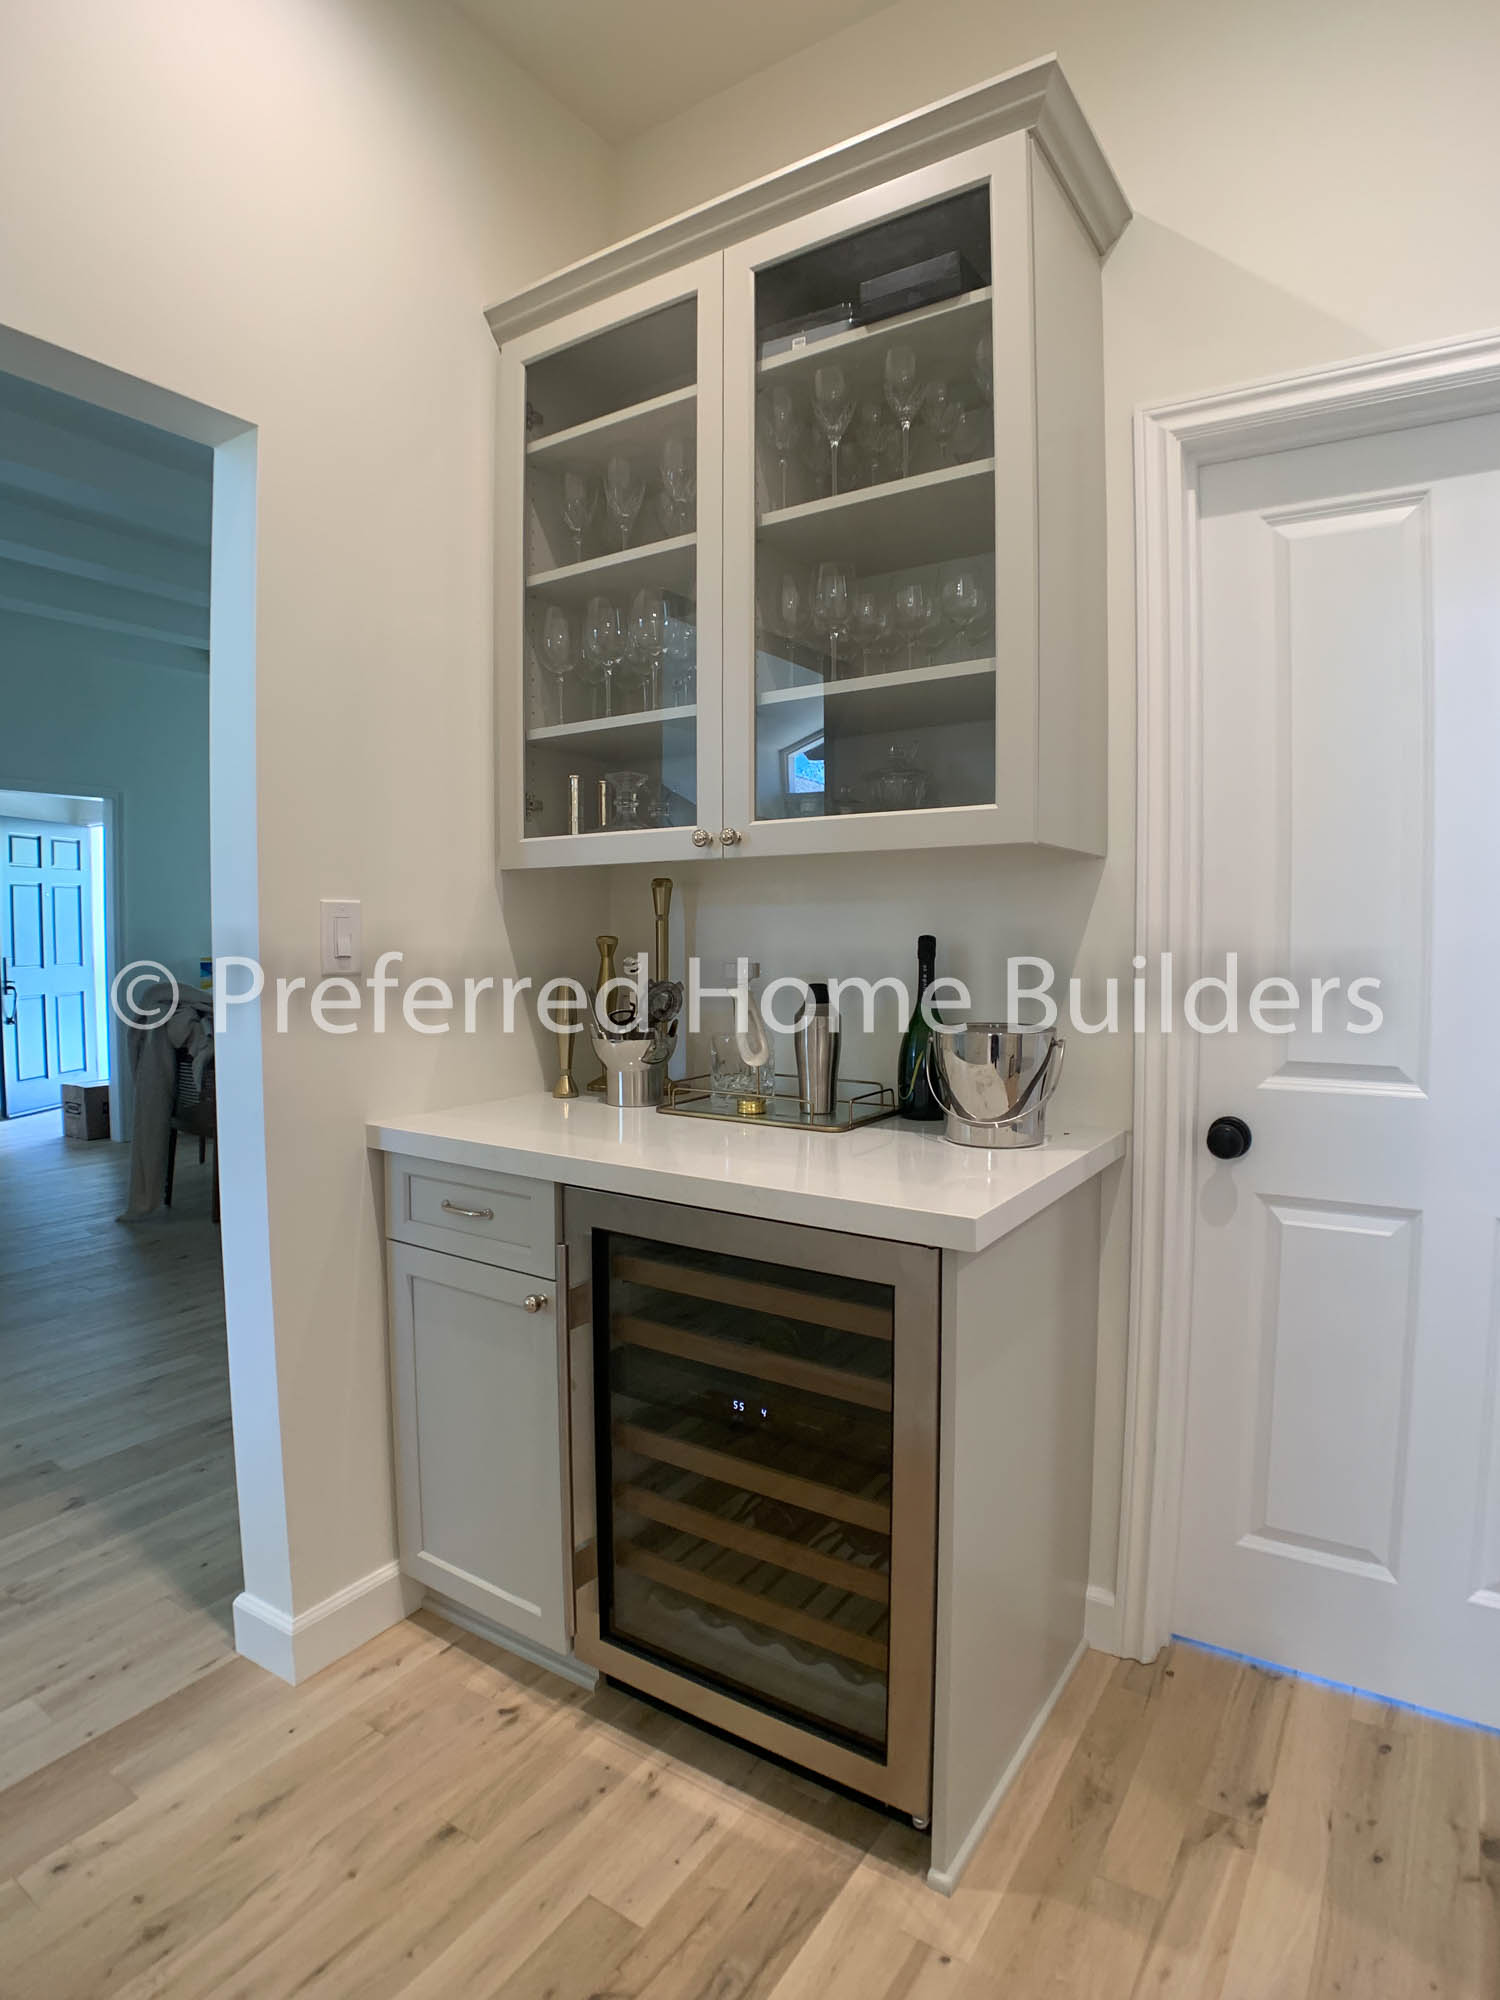 General Remodel in Brentwood Heights 66